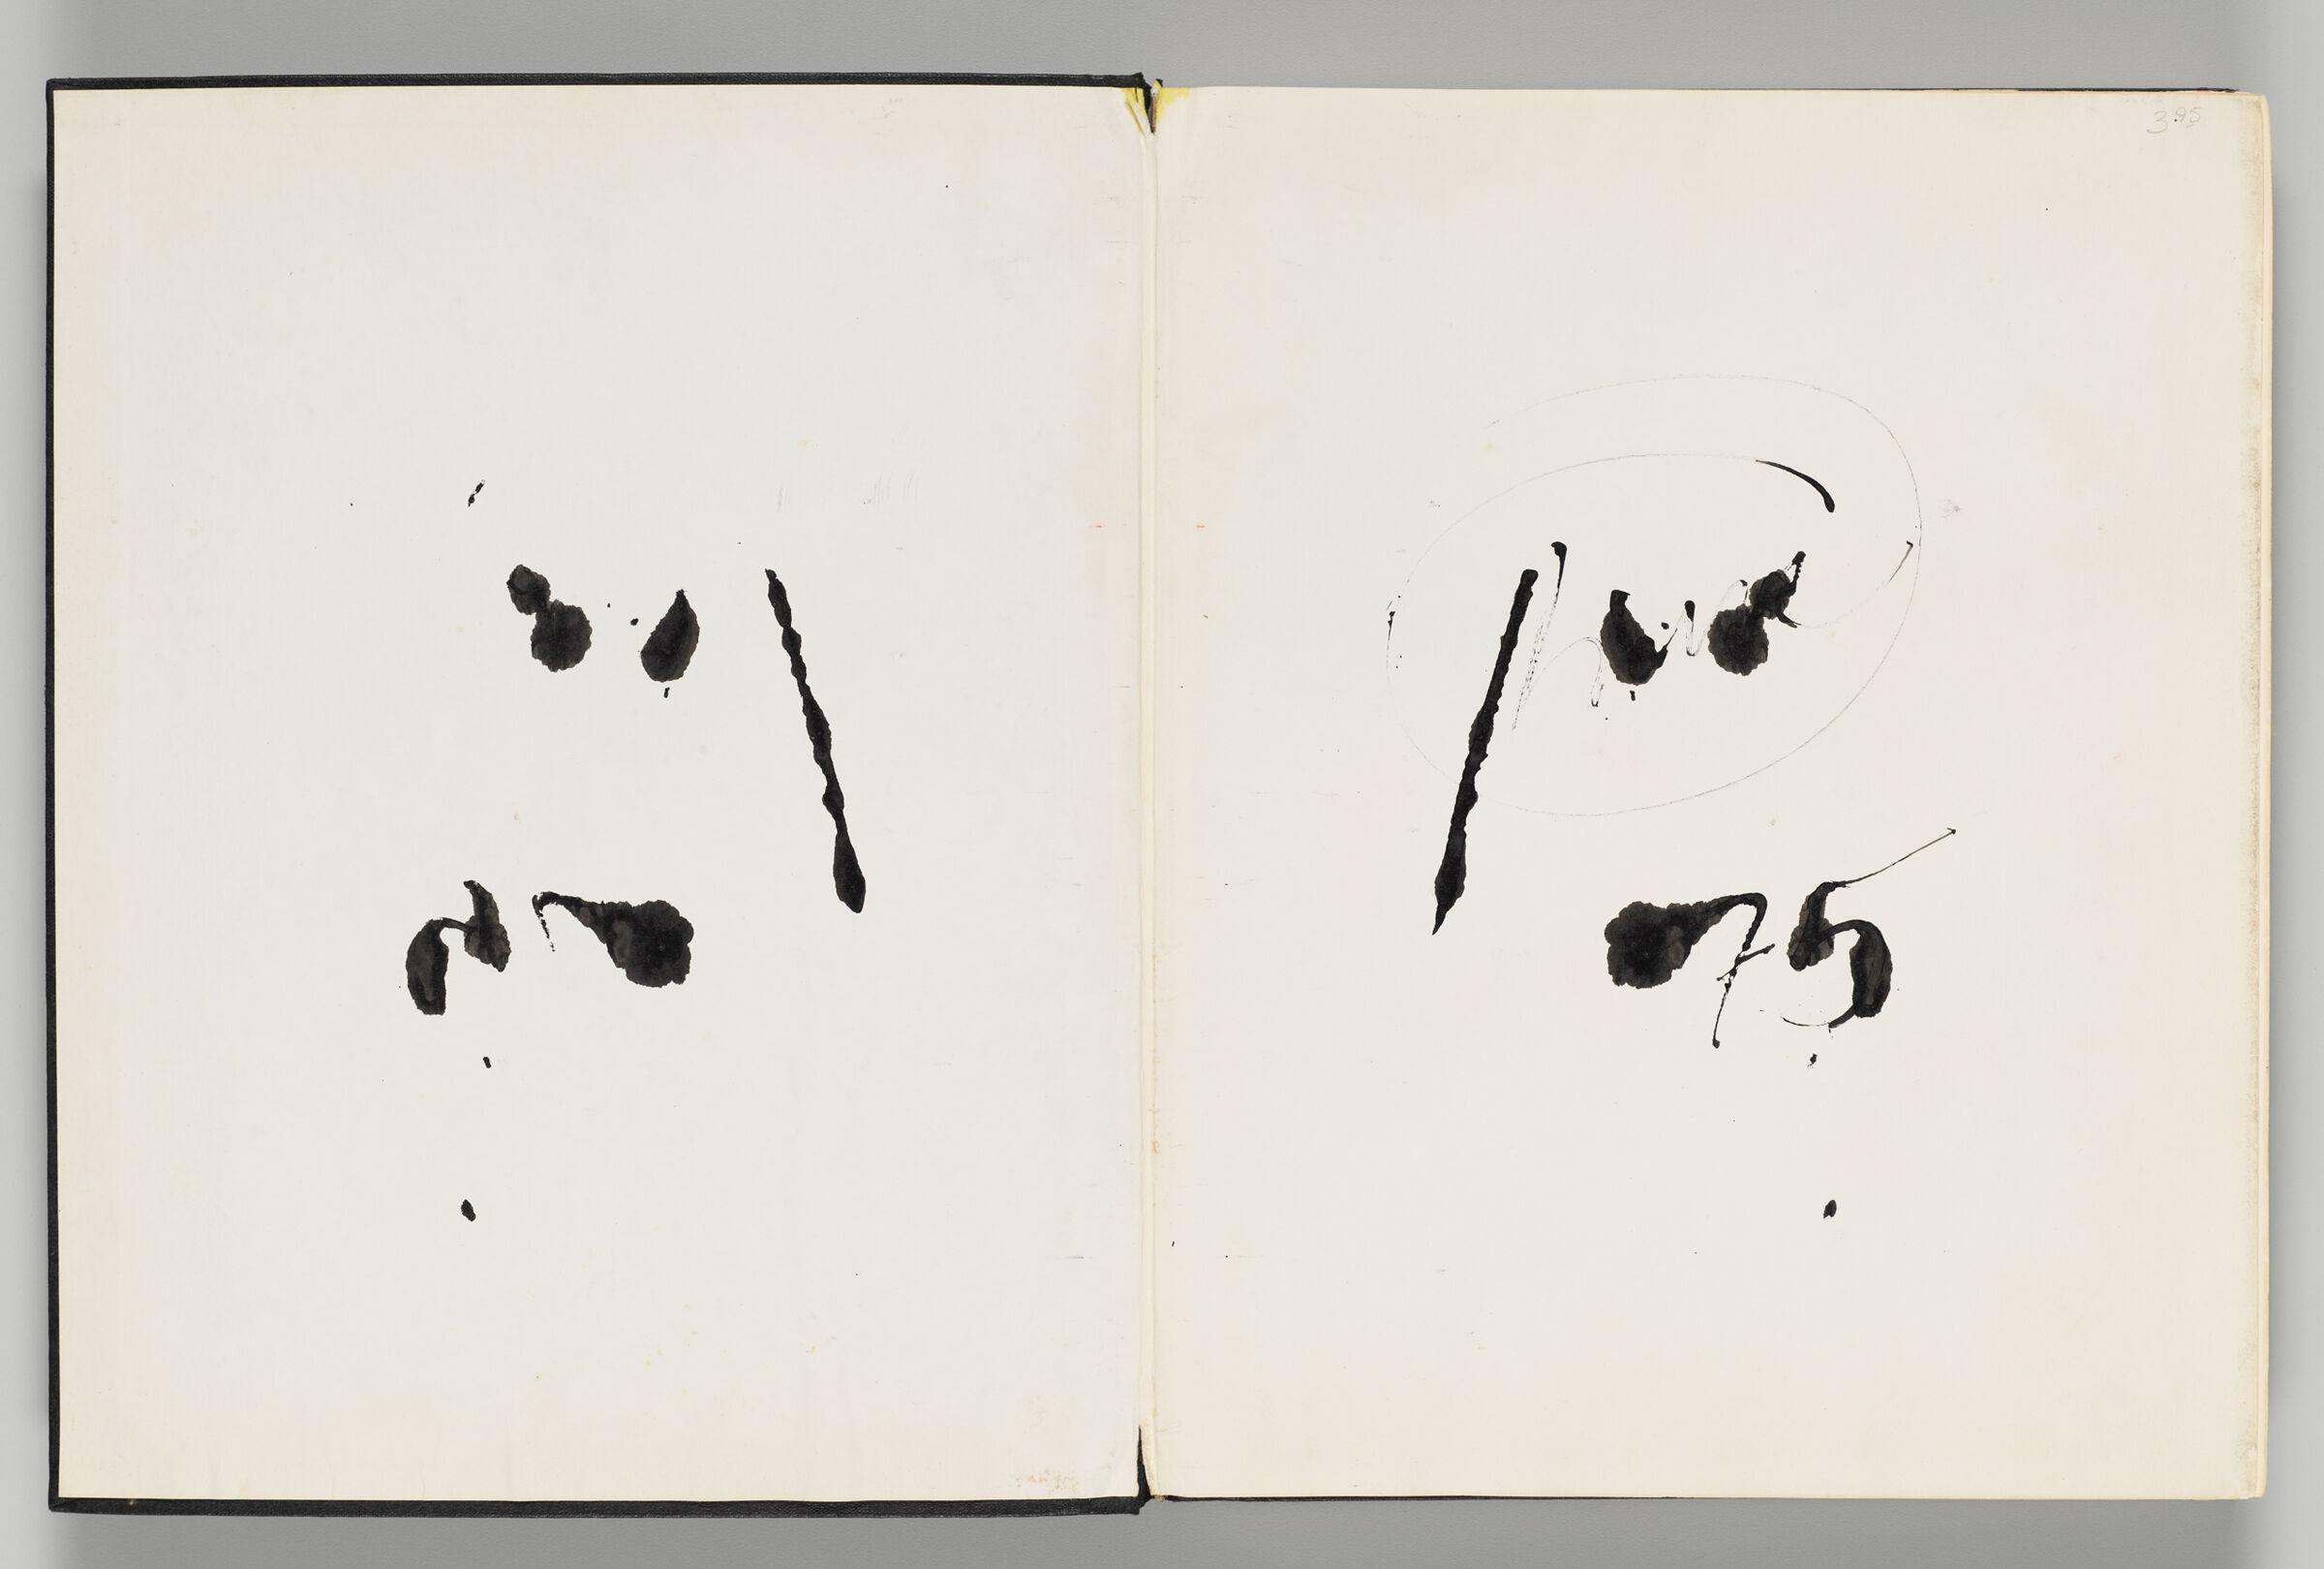 Untitled (Front Endpaper With With Ink Transfer, Left Page); Untitled (Signature, Right Page)